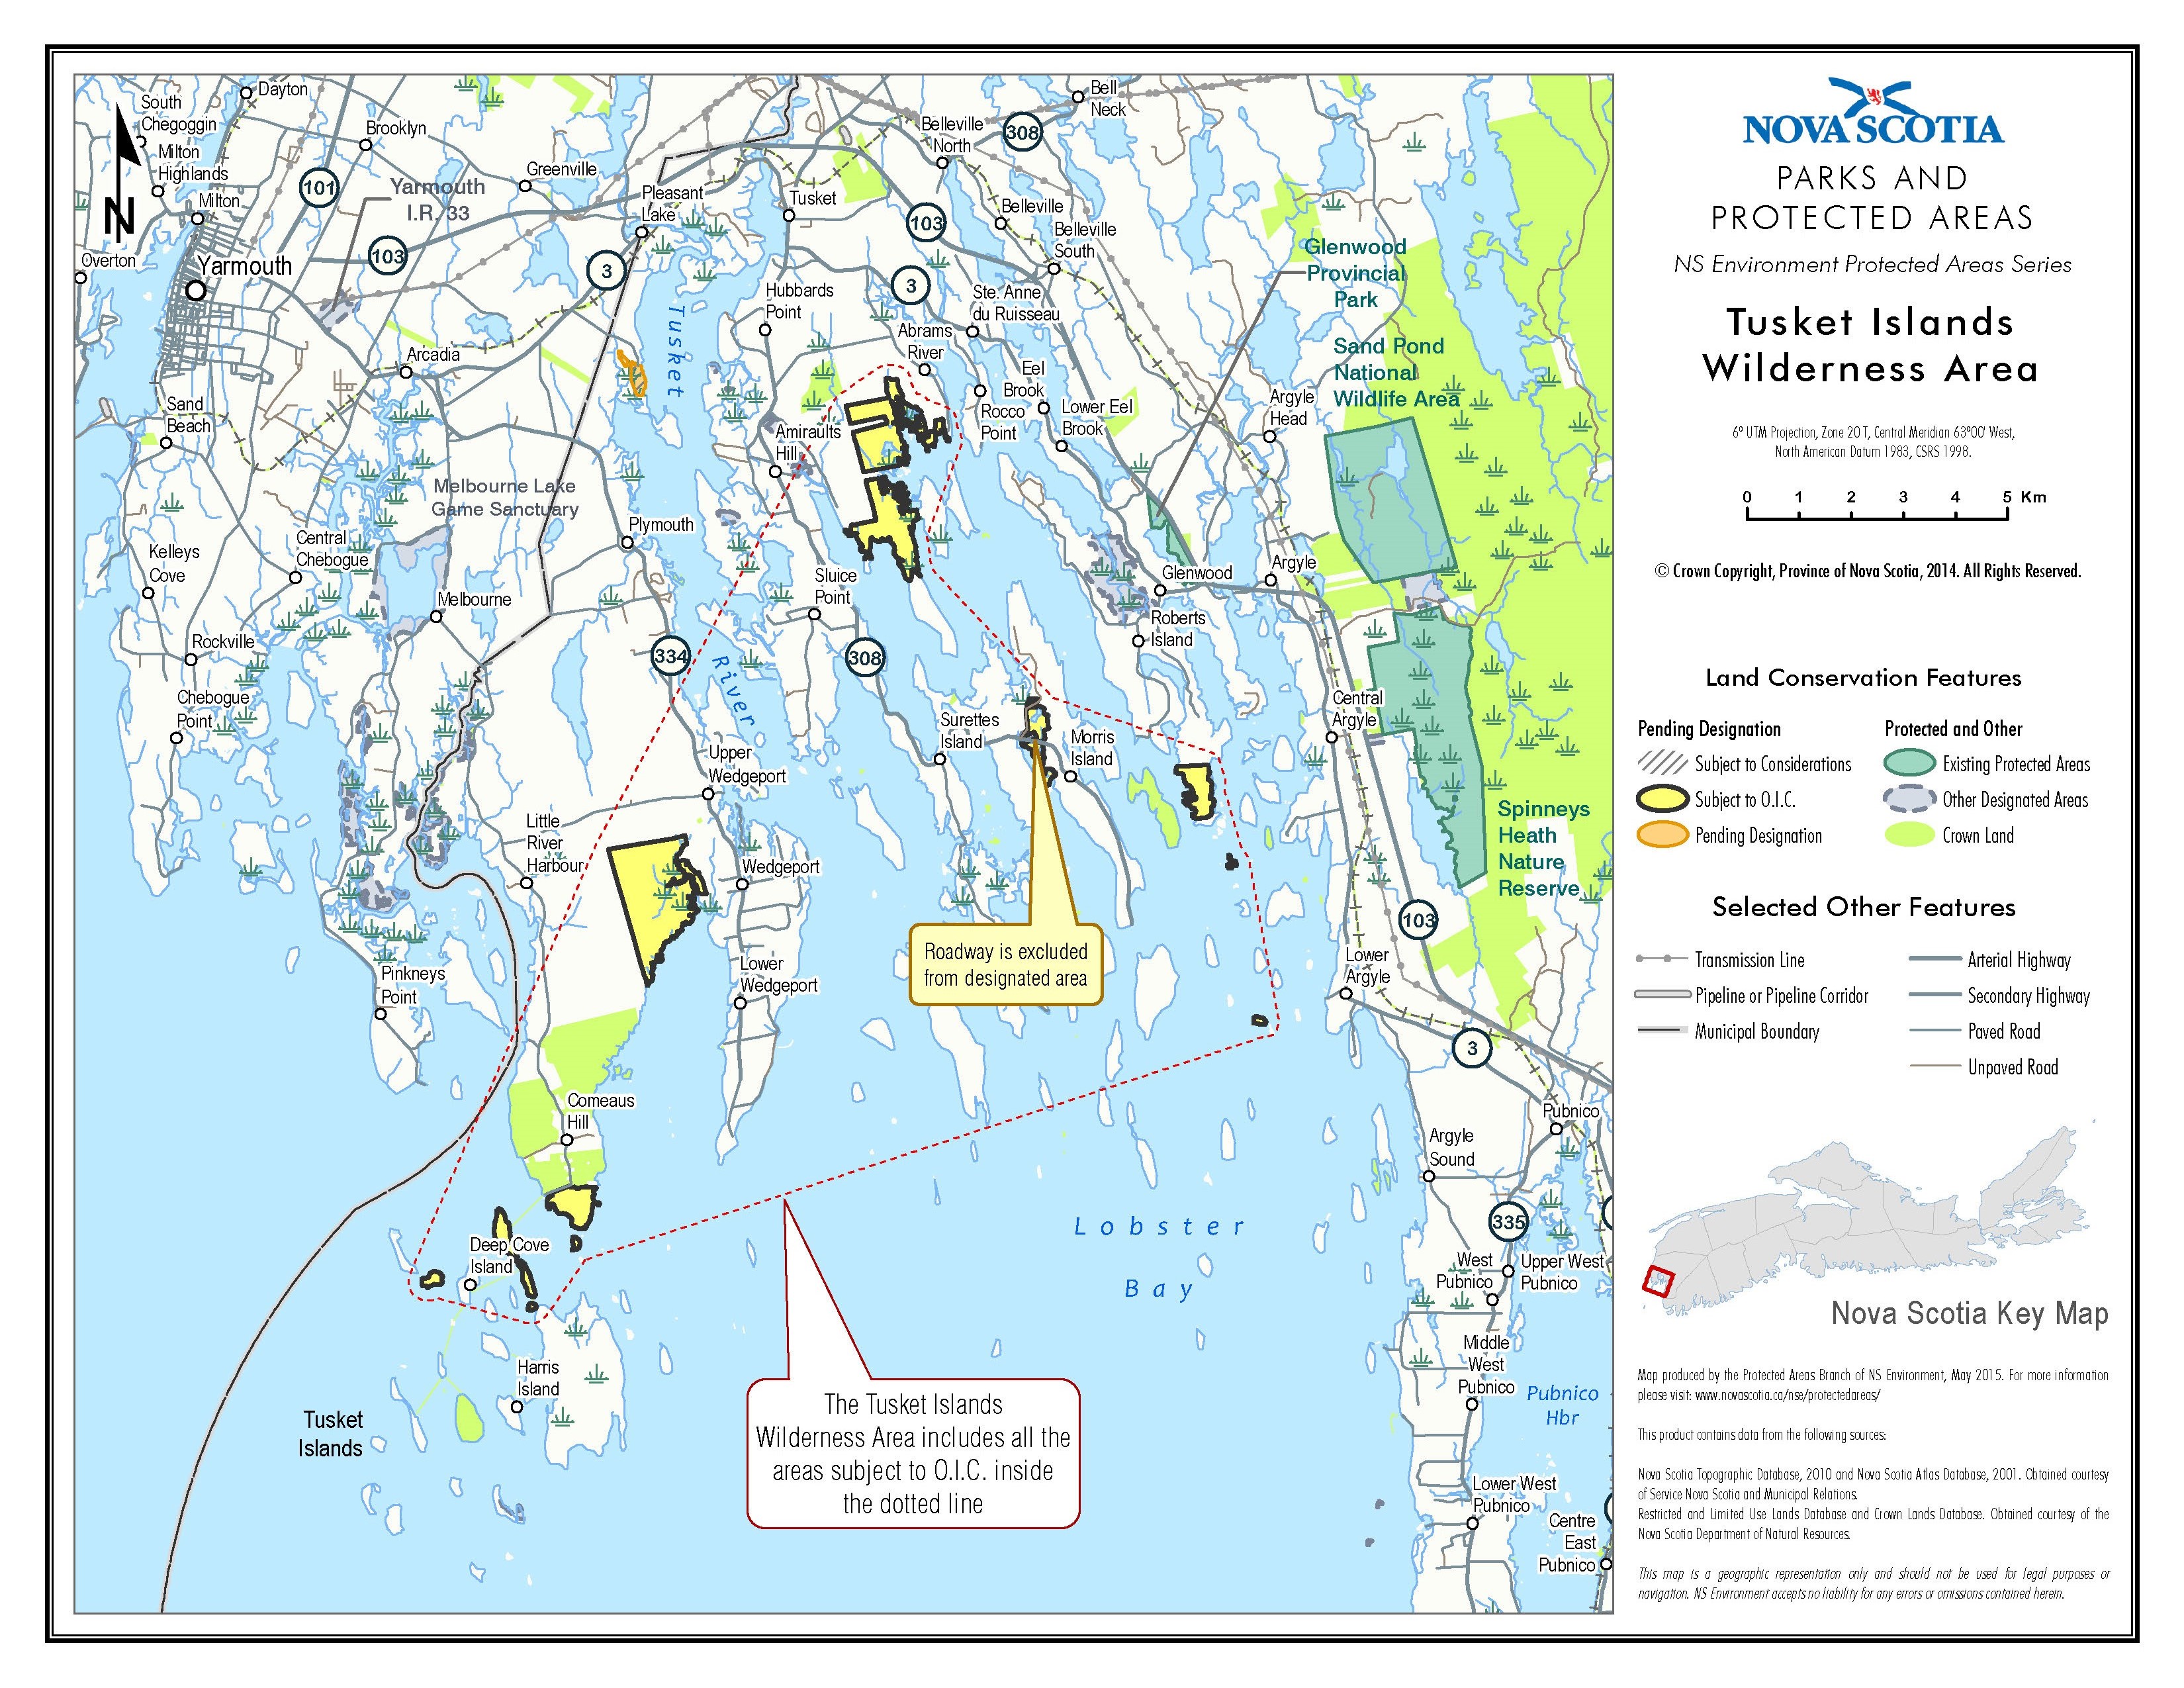 Approximate boundaries of Tusket Islands Wilderness Area